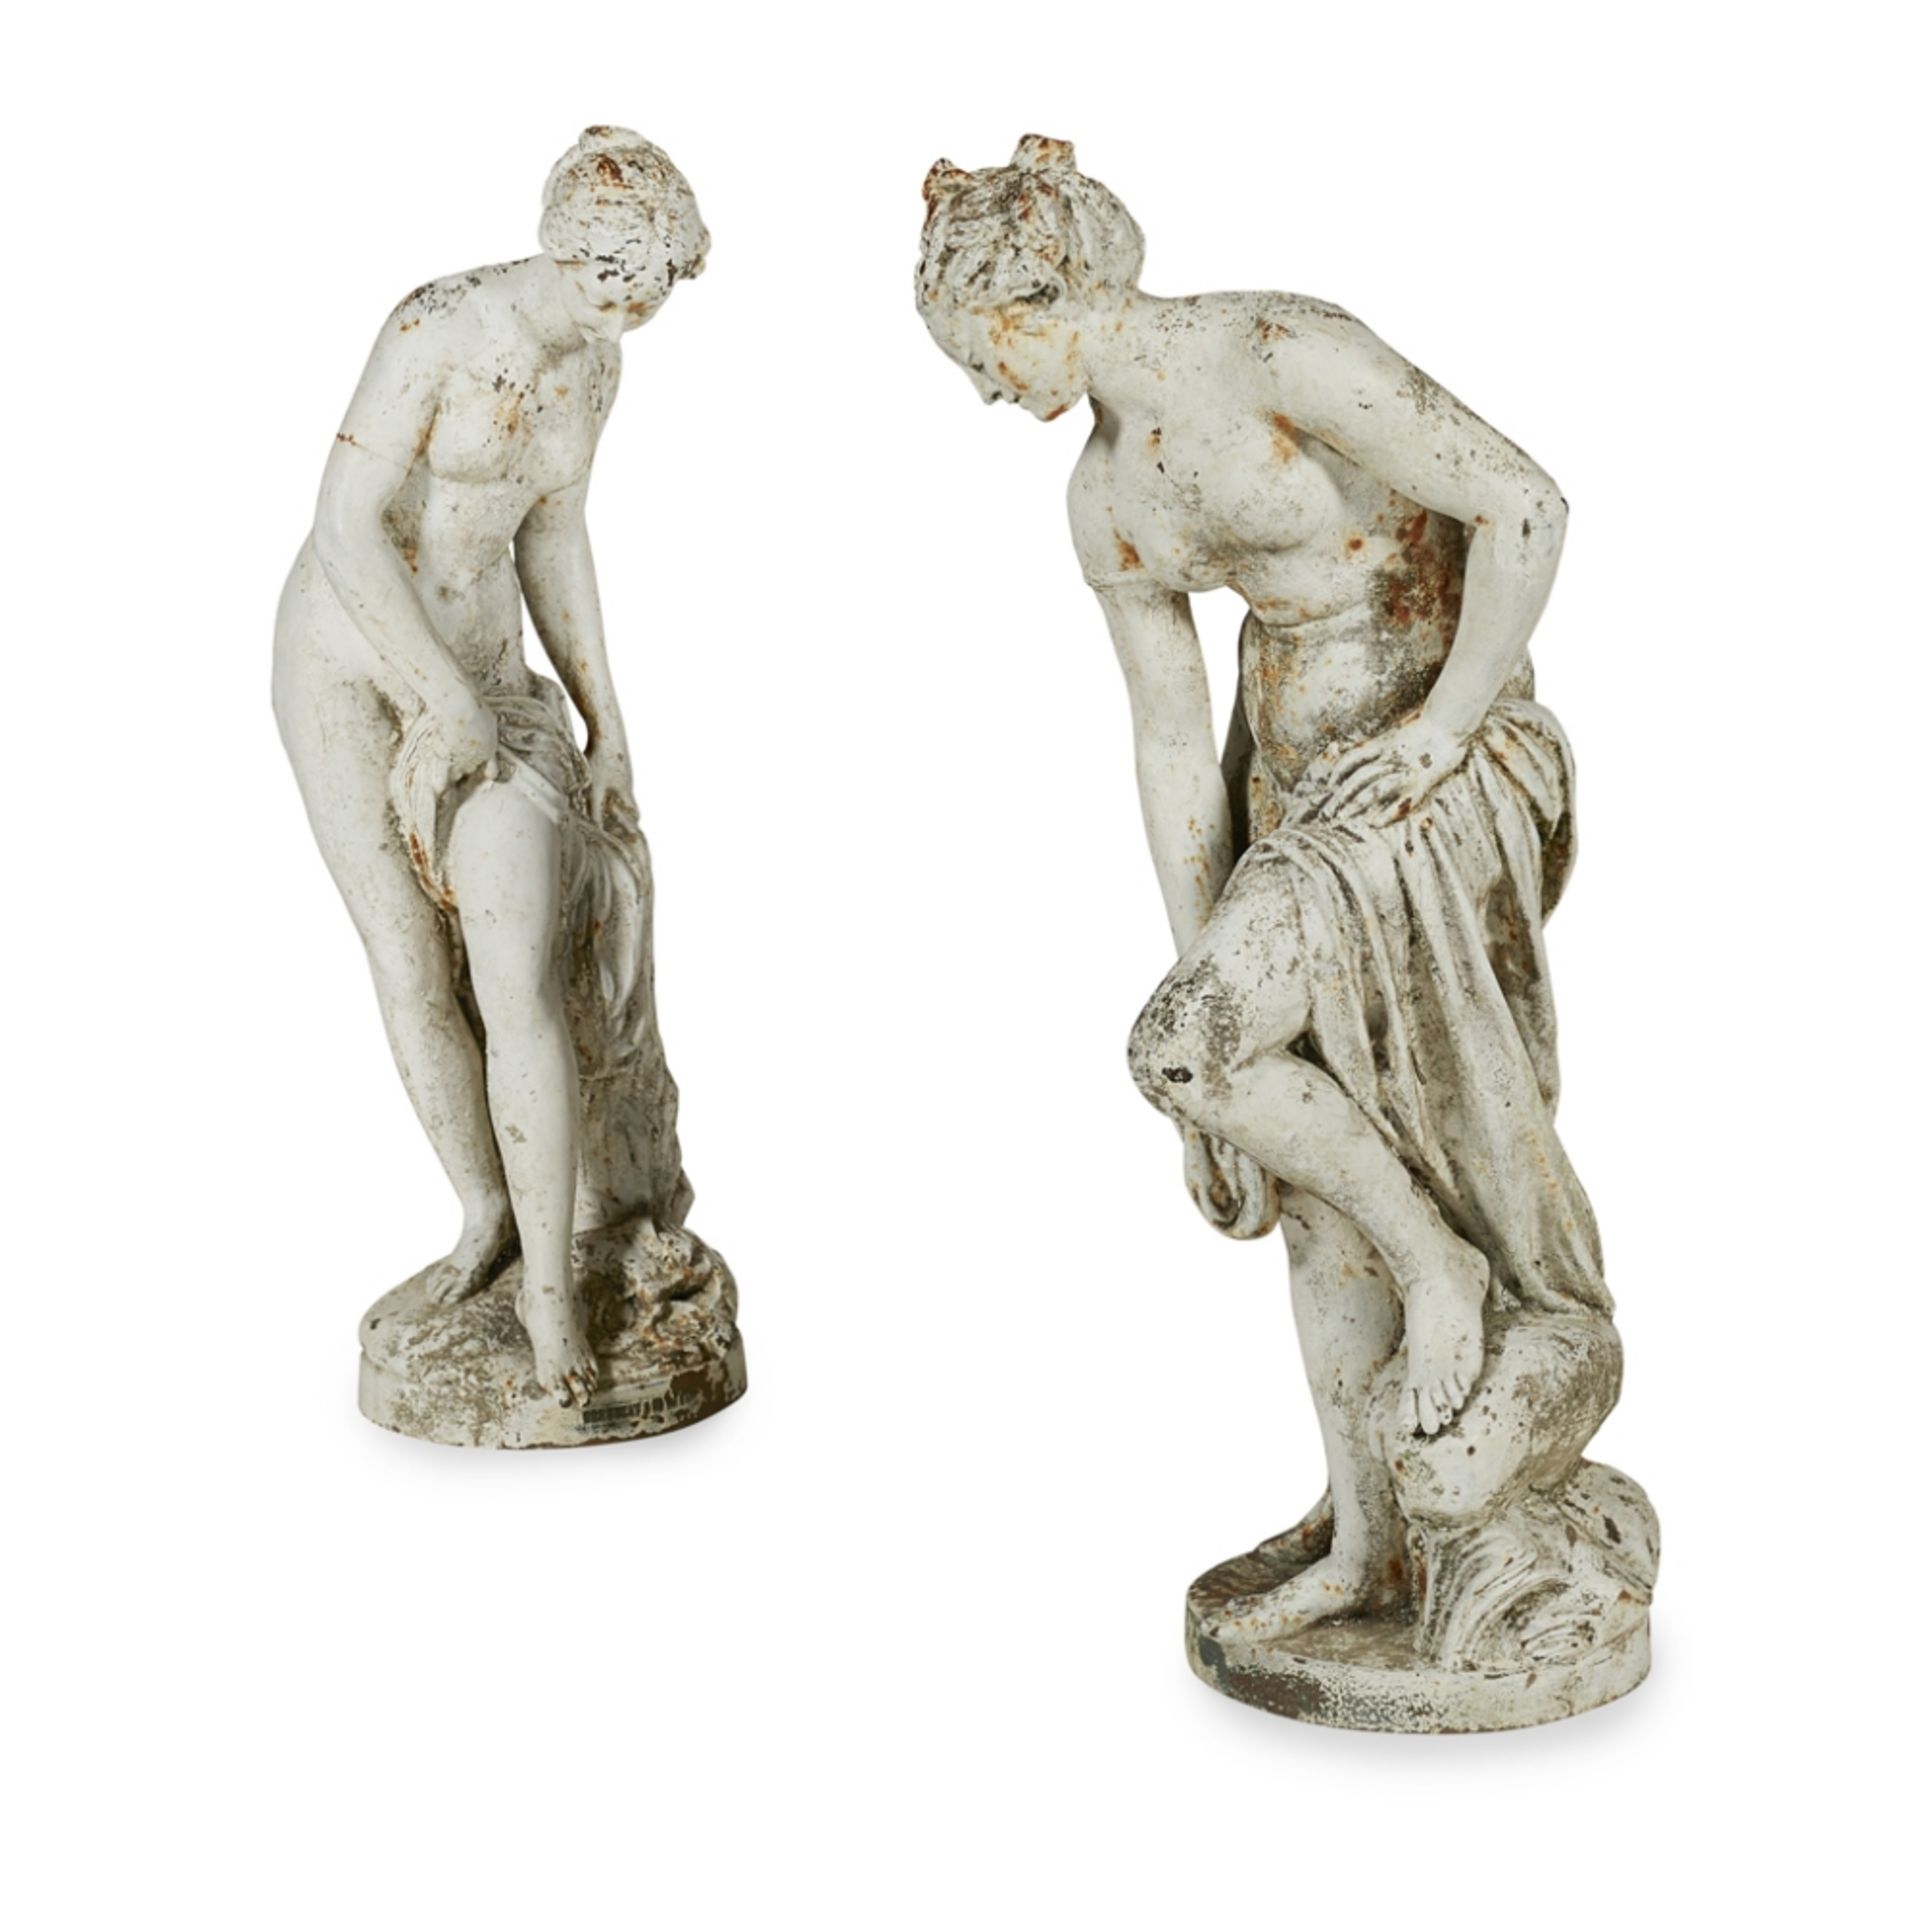 TWO FRENCH PAINTED CAST IRON FIGURES OF VENUS, BY ANDRE BARBEZAT, VAL D'OSNE19TH CENTURY the first